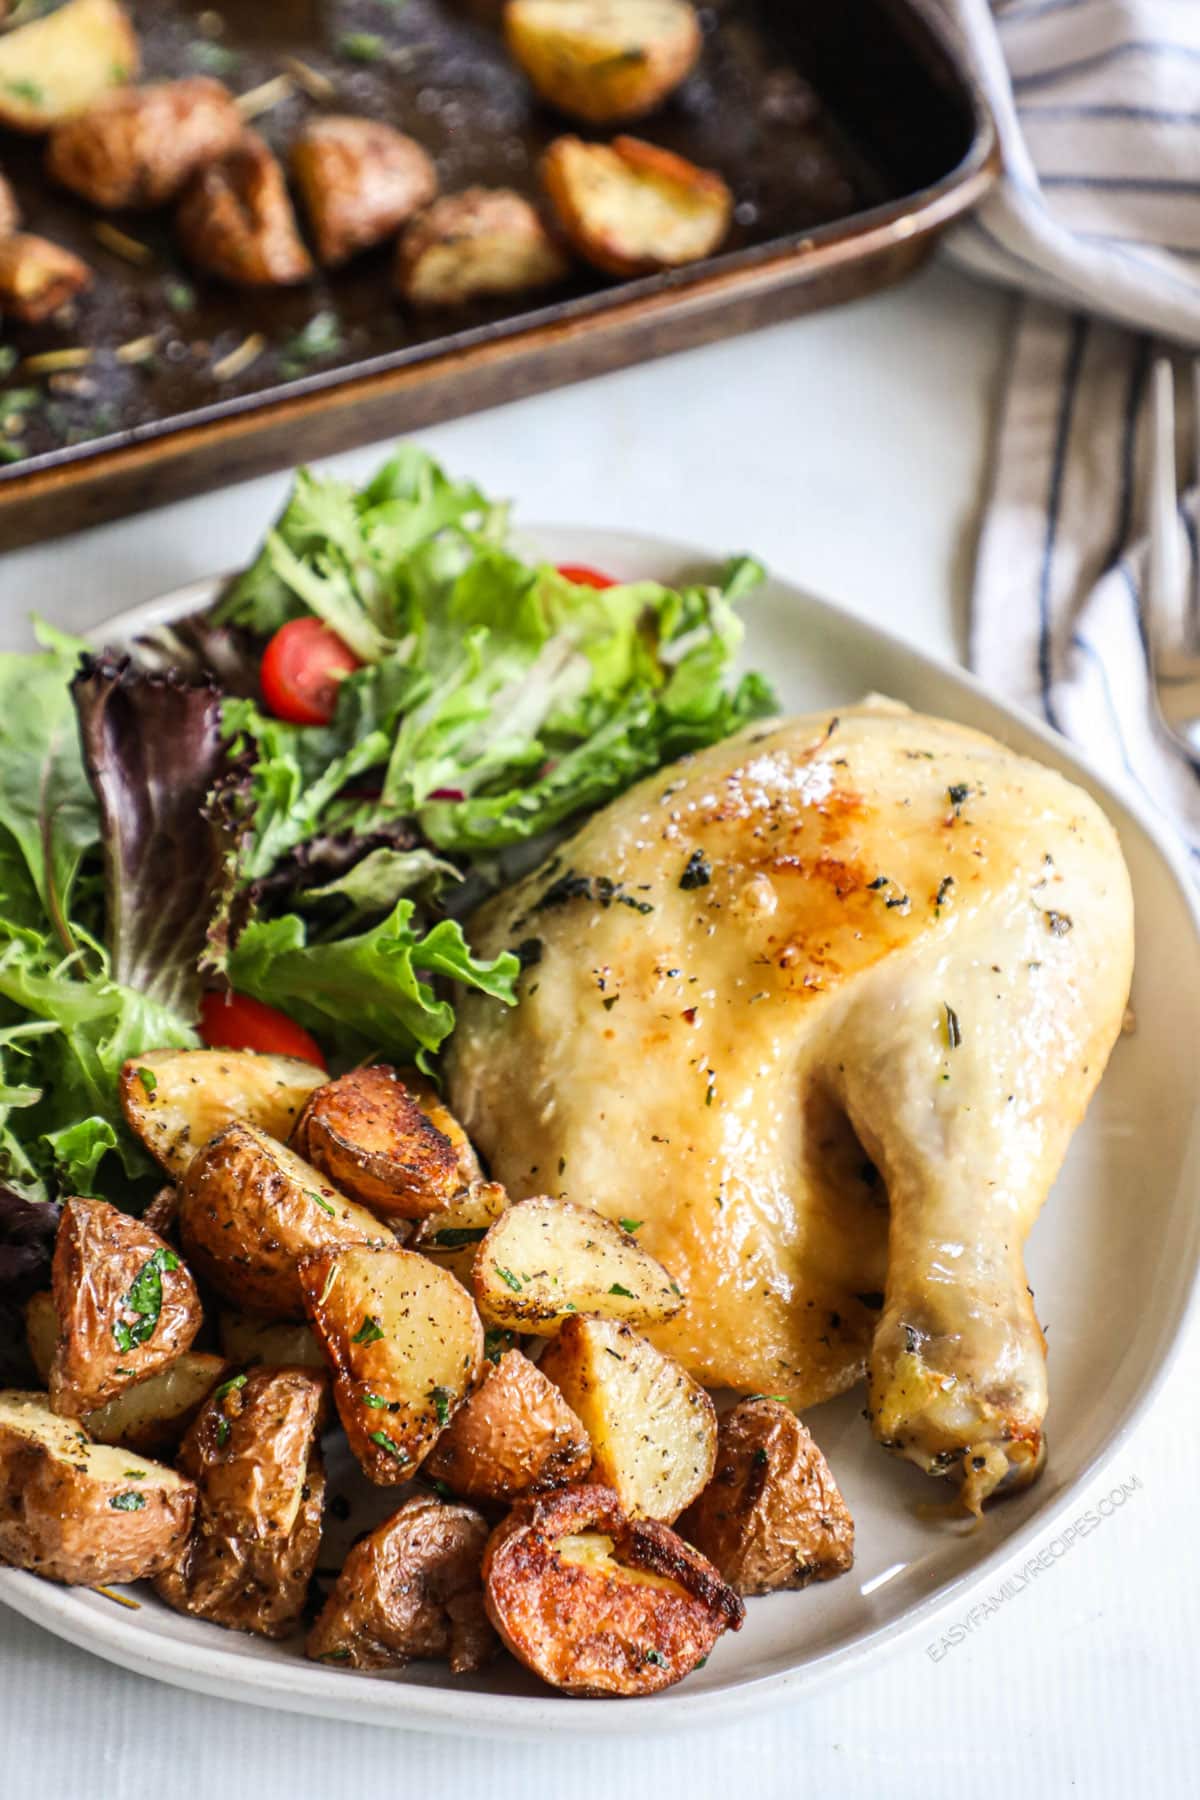 Roast chicken on plate with salad and roasted potatoes